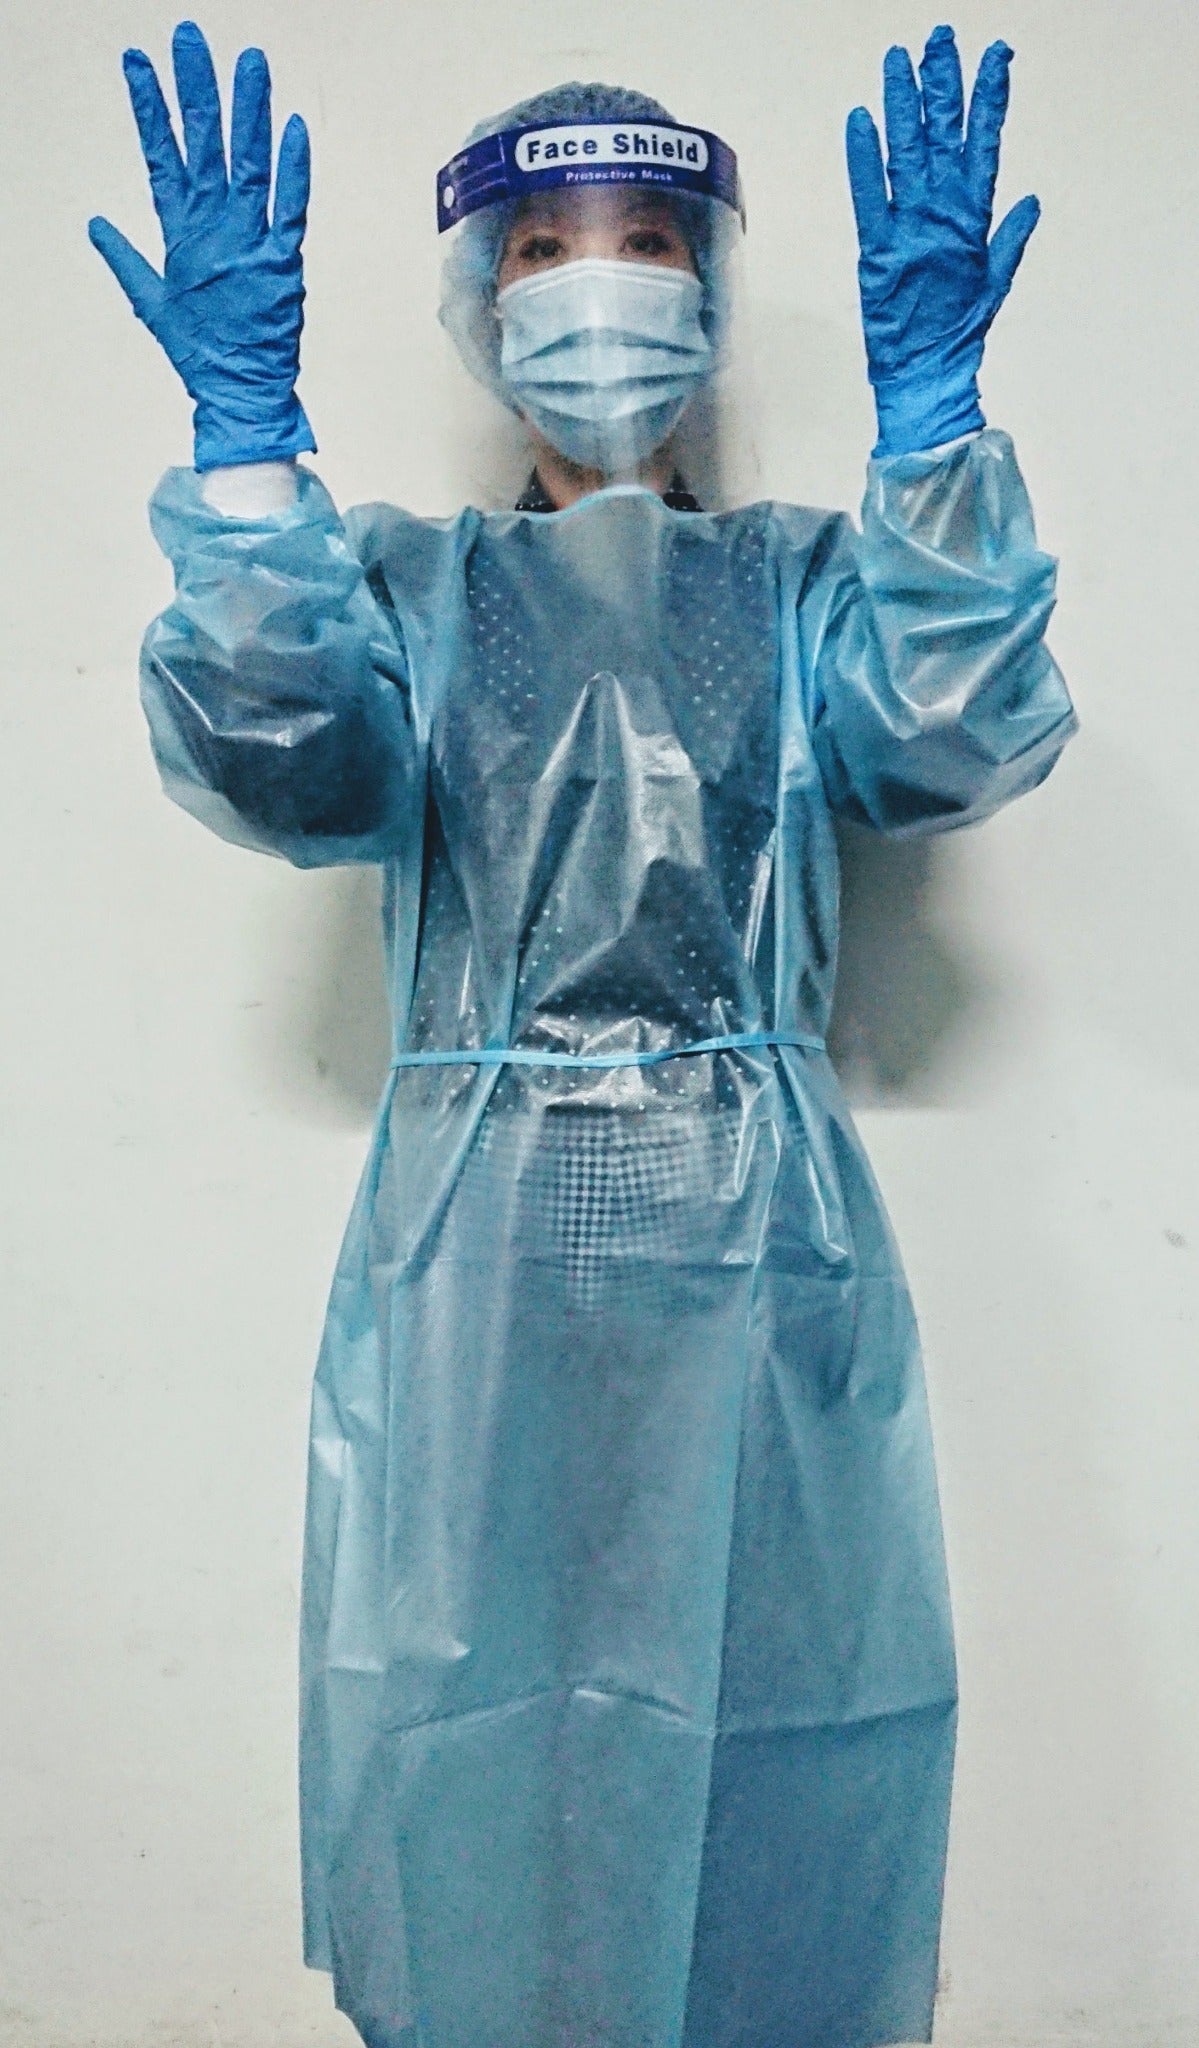 Waterproof Protective Isolation Gown Standard Surgical Sterile Level 2 1  Disposable Protective Medic Gown Hospital - China Protective Waterproof  Medic Gown, Standard Isolation Gown SMS | Made-in-China.com